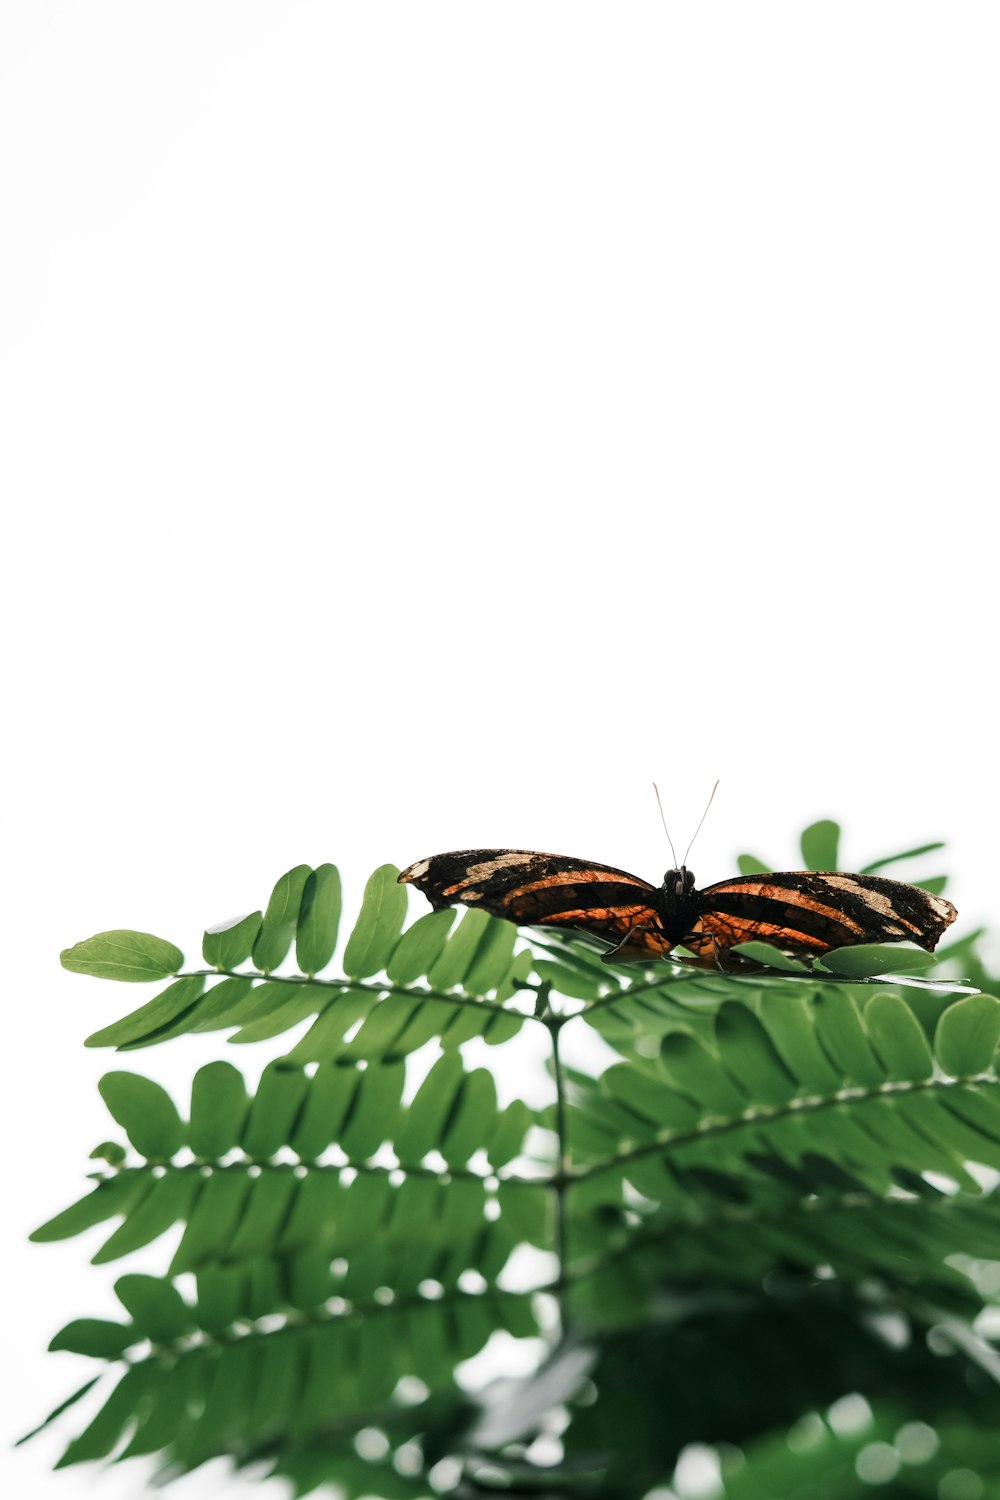 a butterfly sitting on top of a green leaf